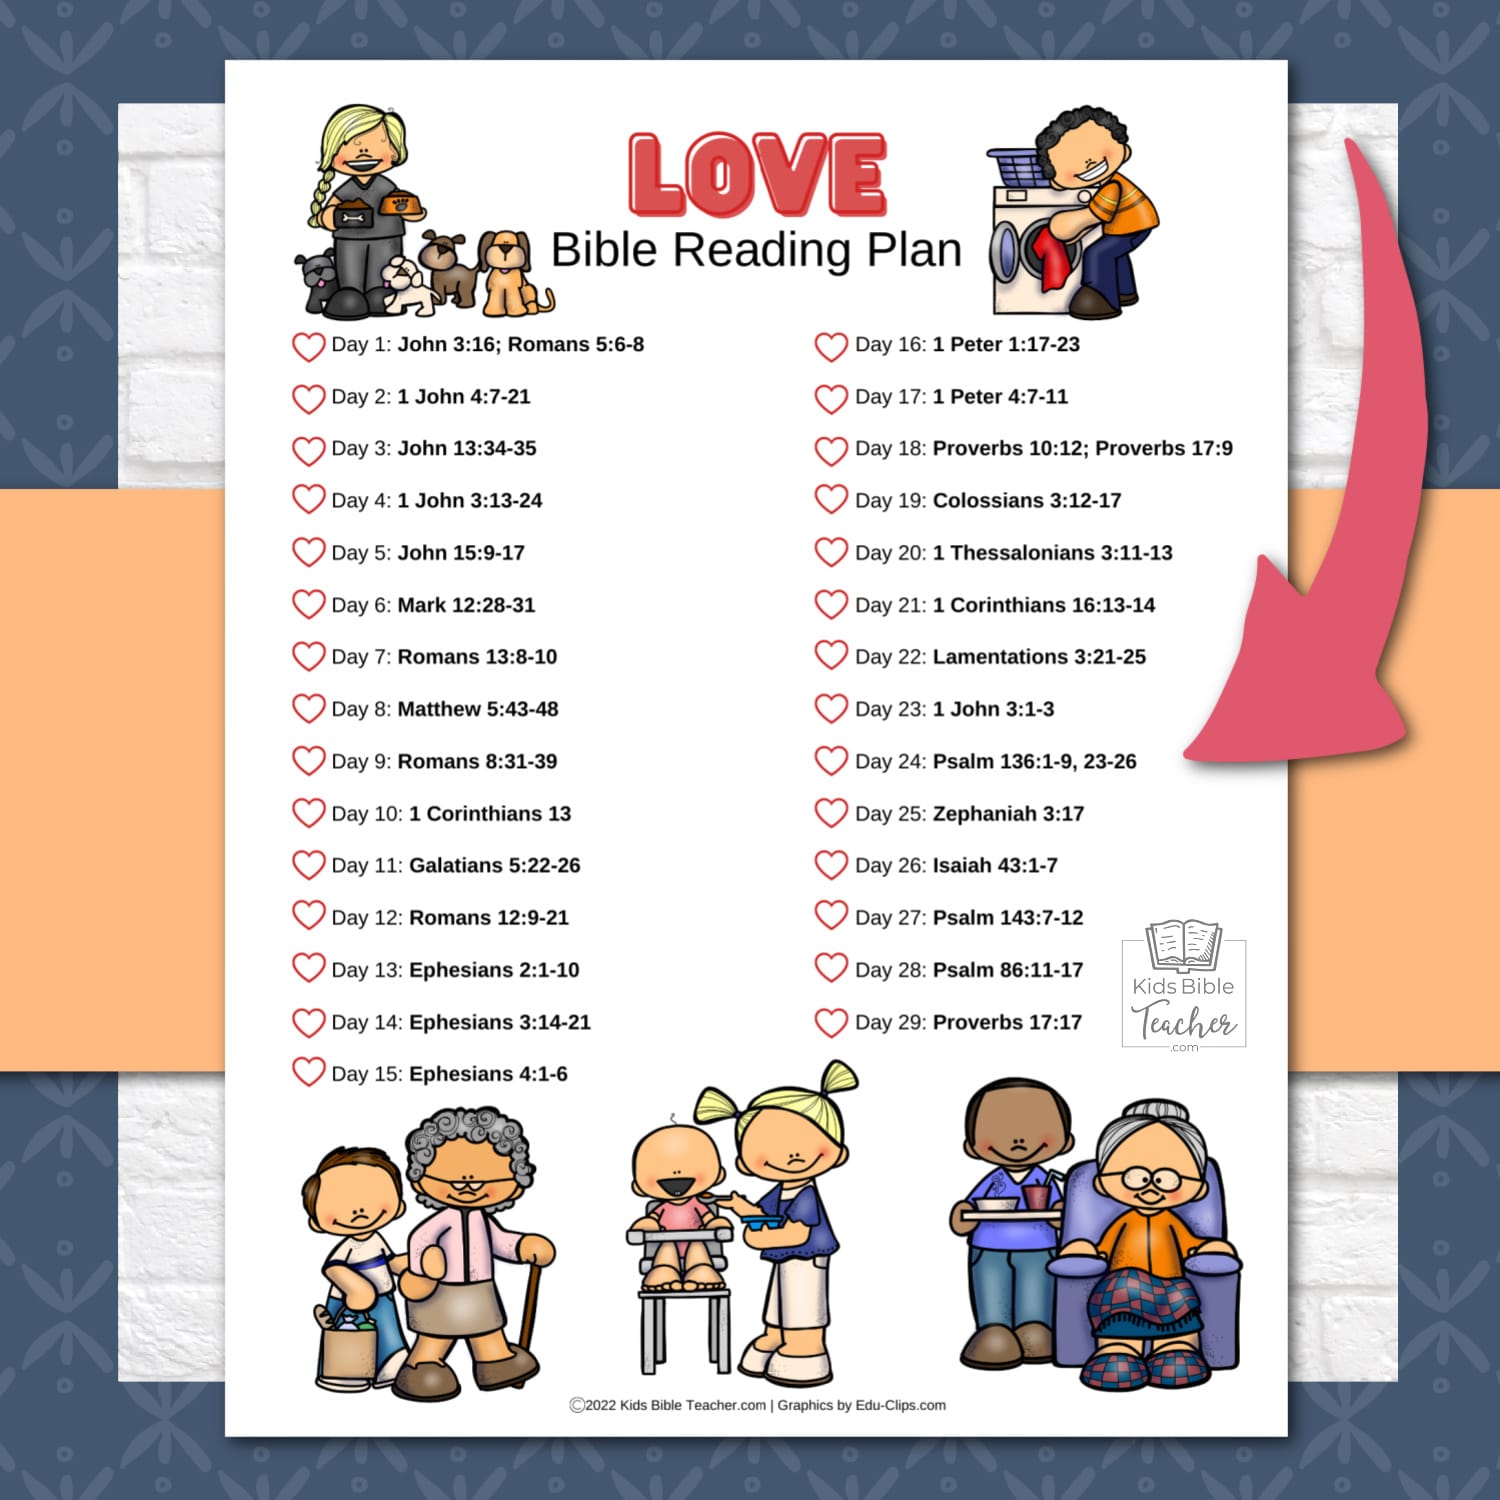 Love Bible Reading Plan for Kids image of full color page